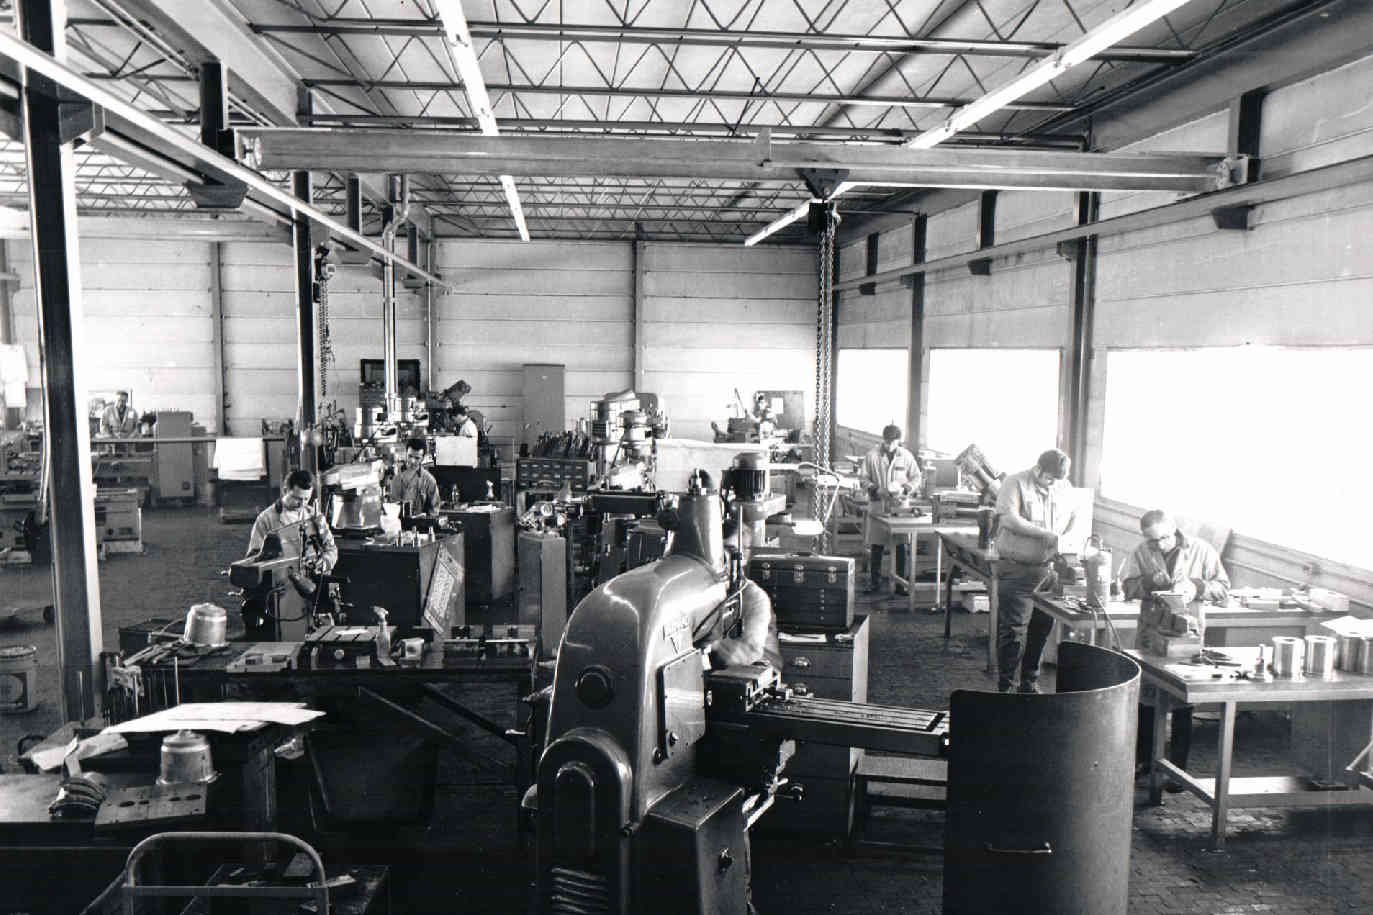 K & K Tools shop in its early days